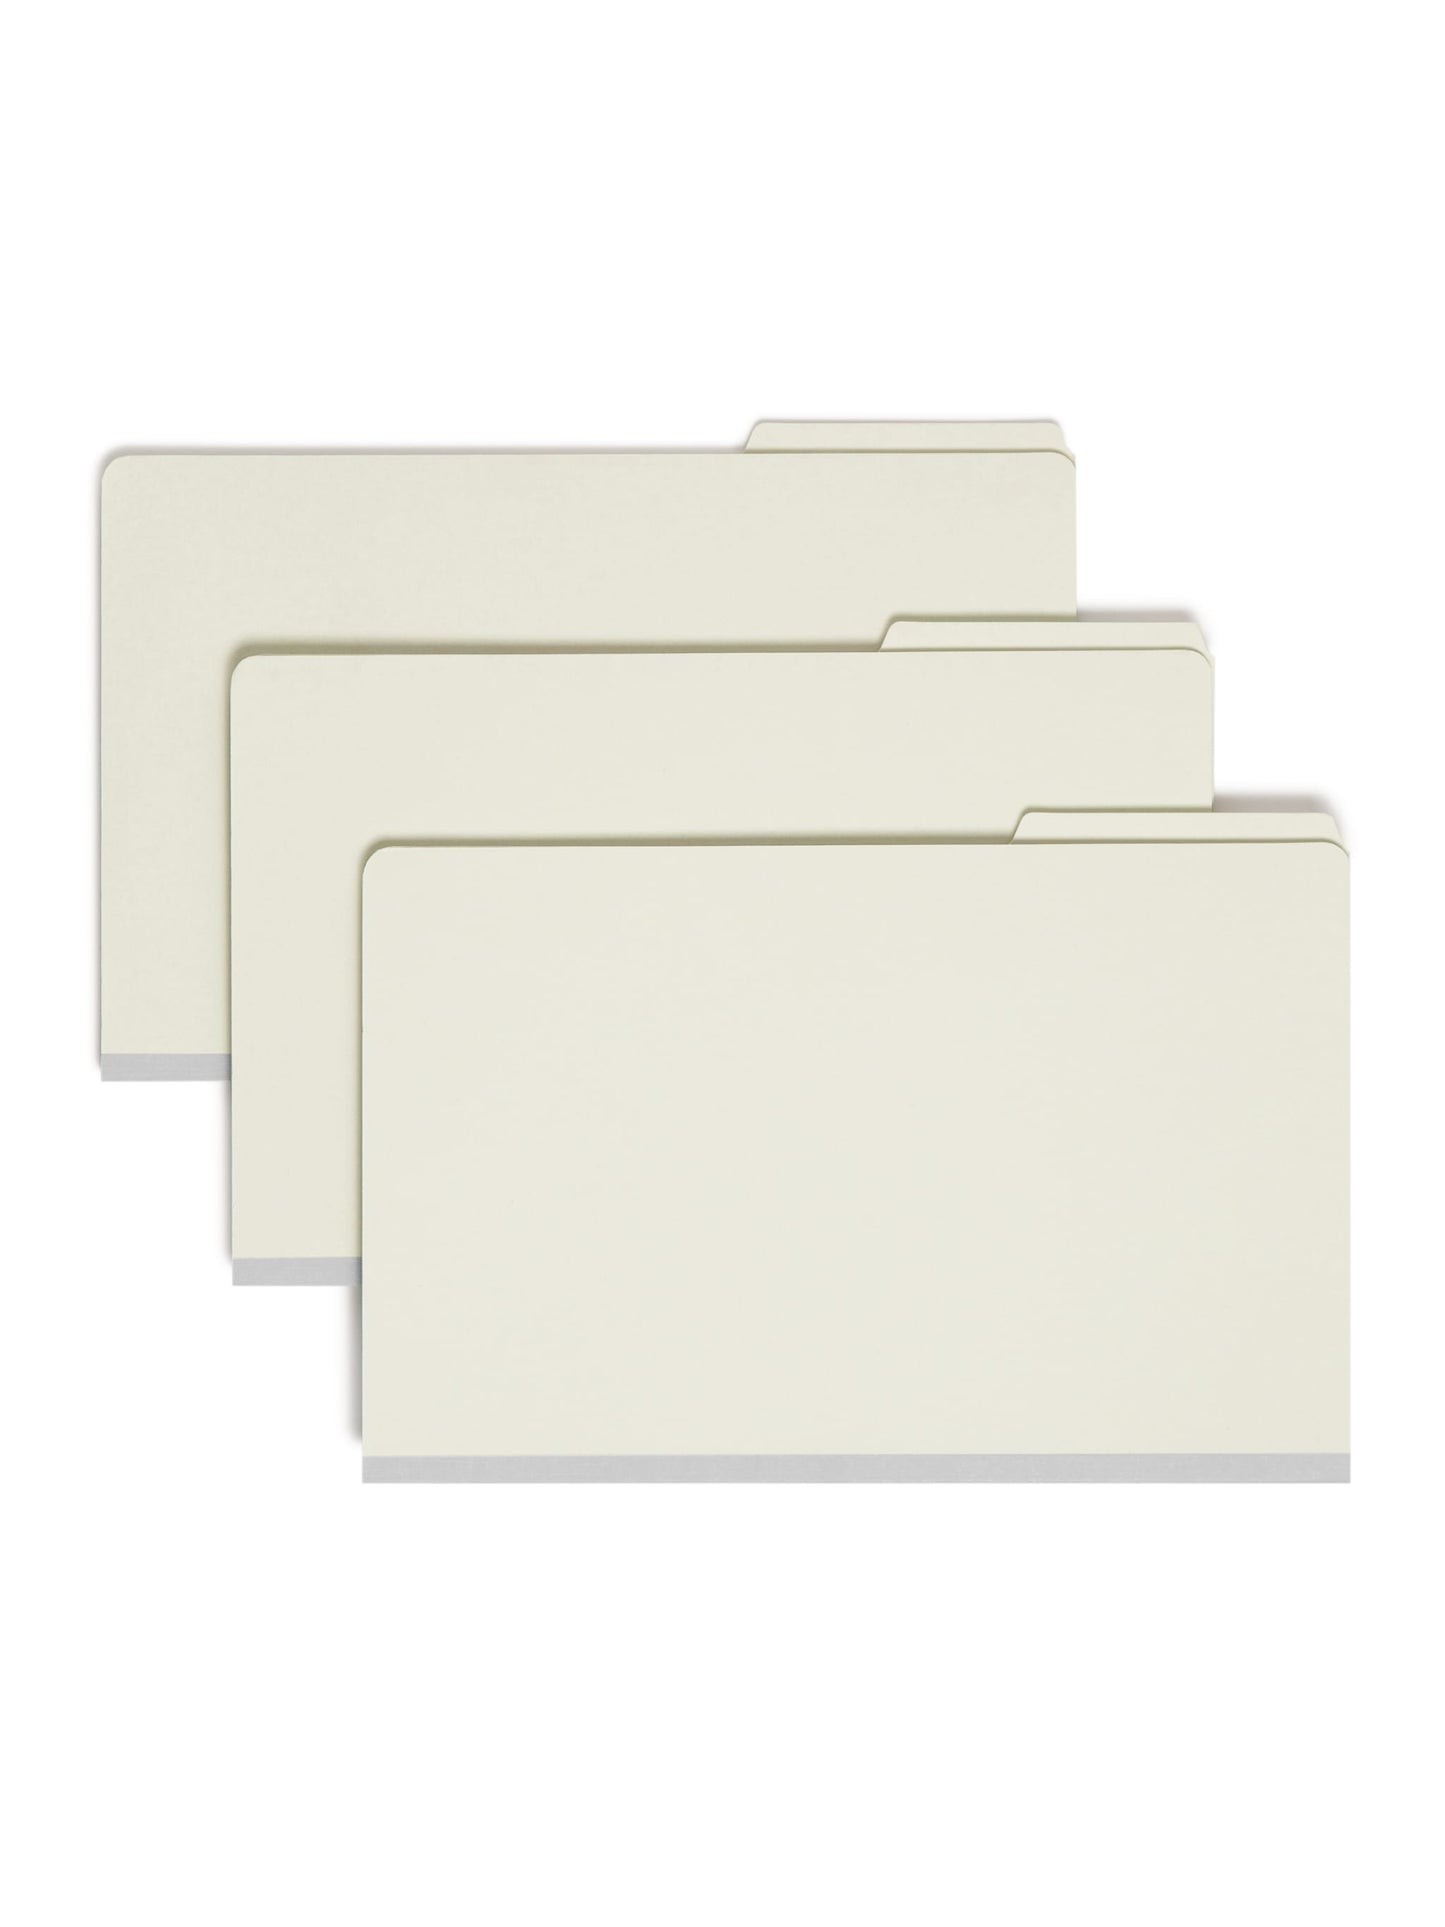 SafeSHIELD® Pressboard Classification File Folders, 2 Dividers, 2 inch Expansion, 1/3-Cut Tab, Gray/Green Color, Legal Size, Set of 0, 30086486192157